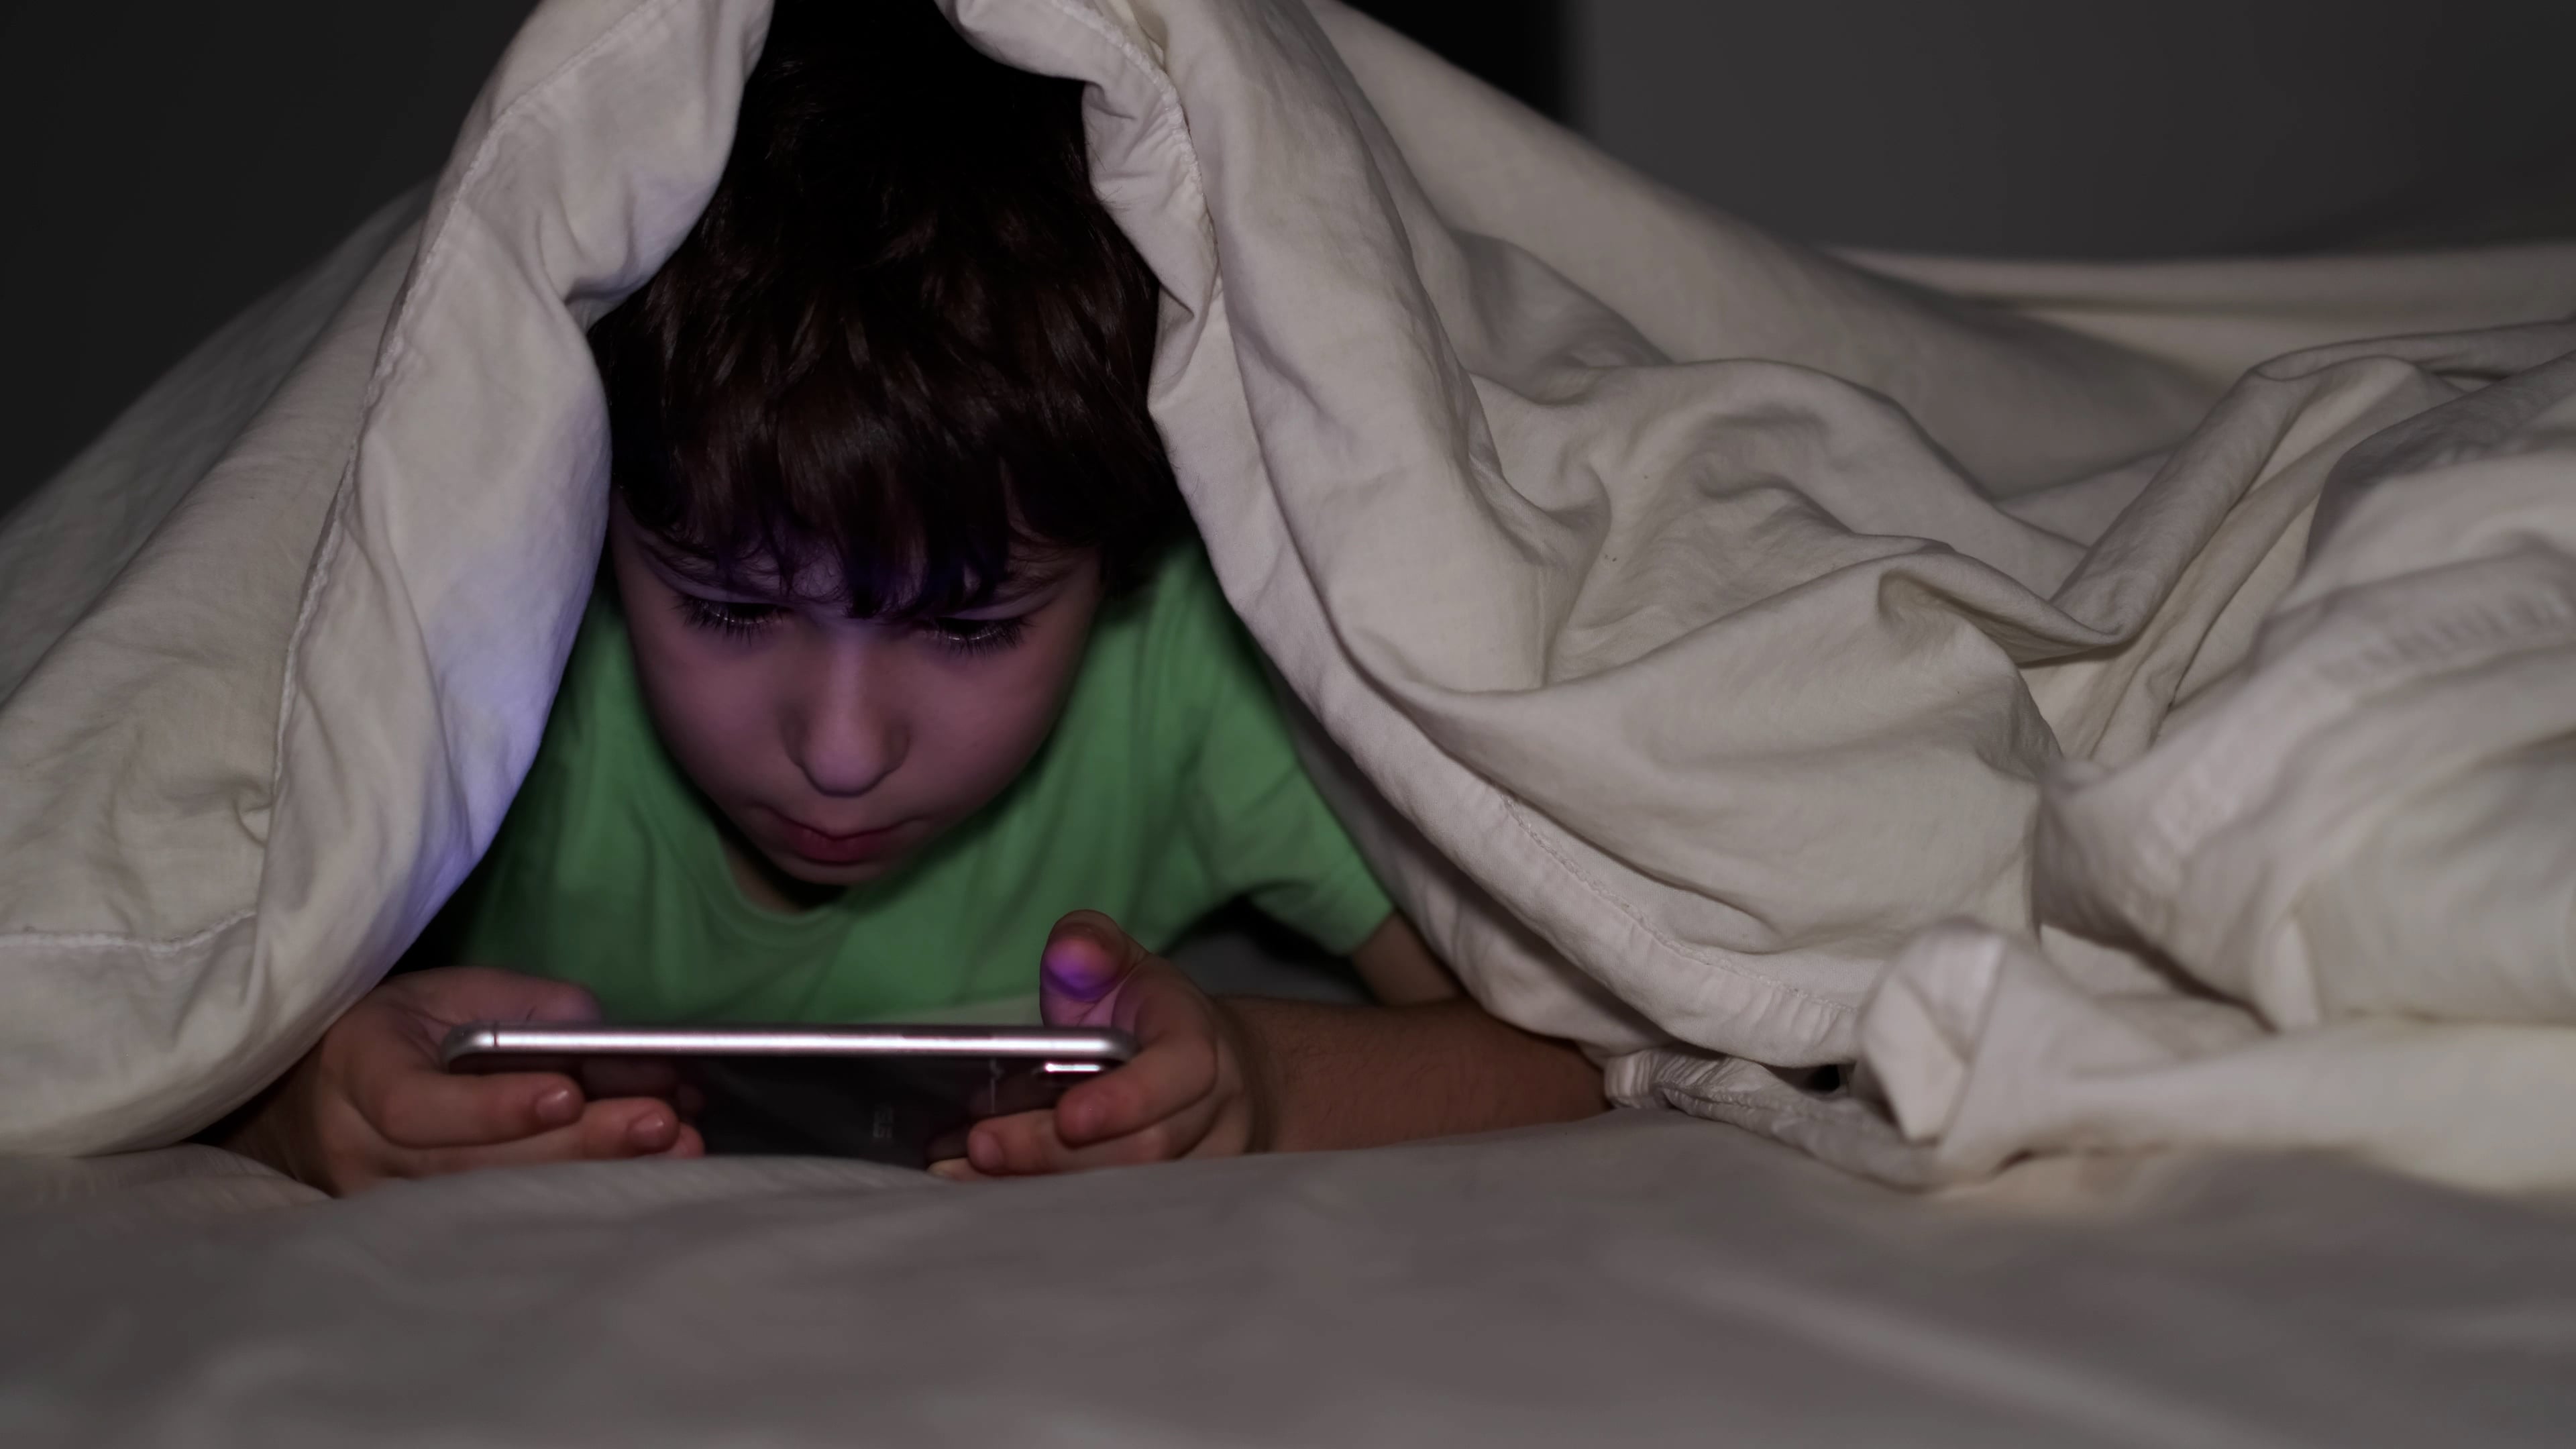 Boy looks at a mobile phone under a duvet at night.